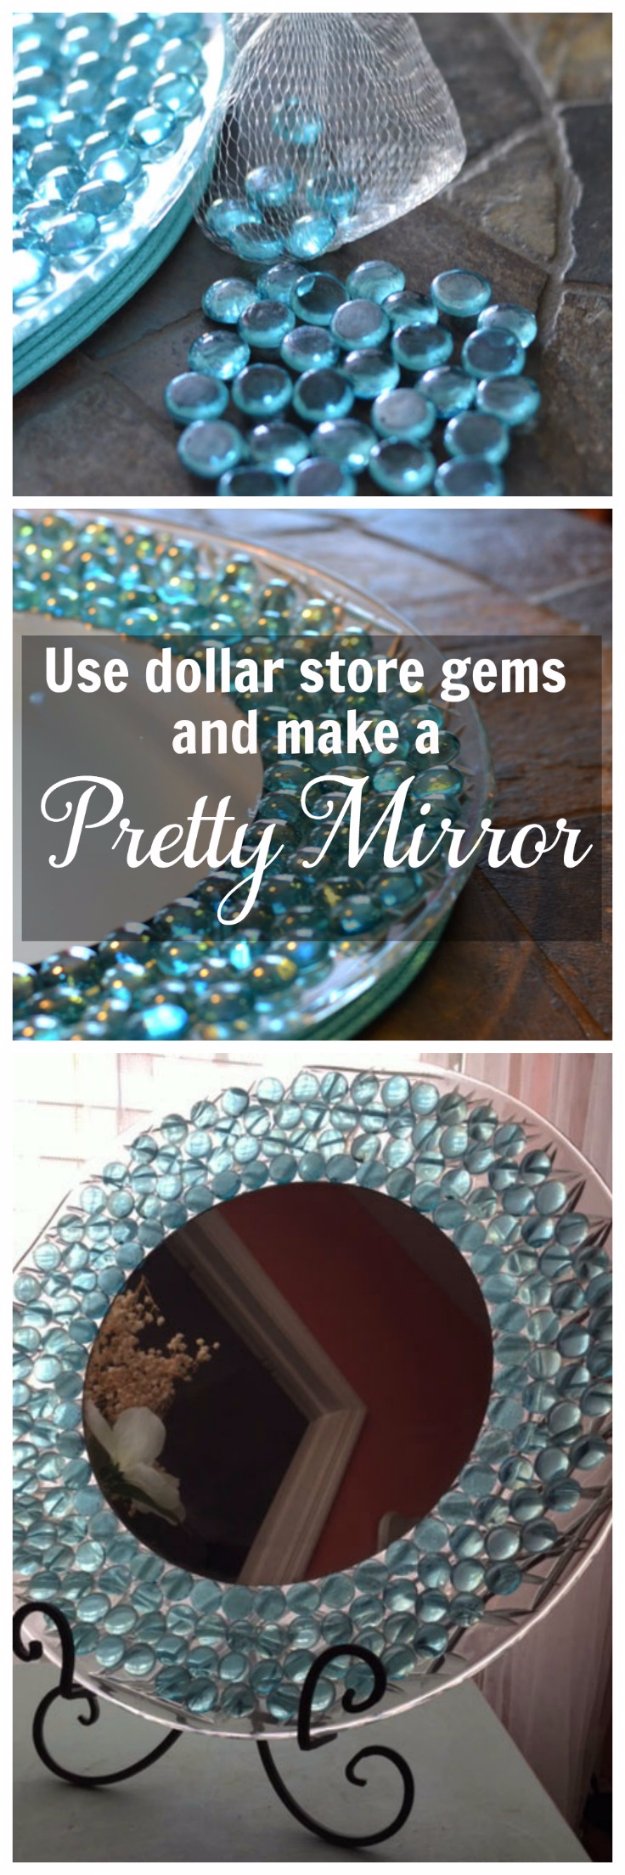 Crafts to Make and Sell - Pretty Dresser Mirror - Cool and Cheap Craft Projects and DIY Ideas for Teens and Adults to Make and Sell - Fun, Cool and Creative Ways for Teenagers to Make Money Selling Stuff to Make #teencrafts #diyideas #craftstosell